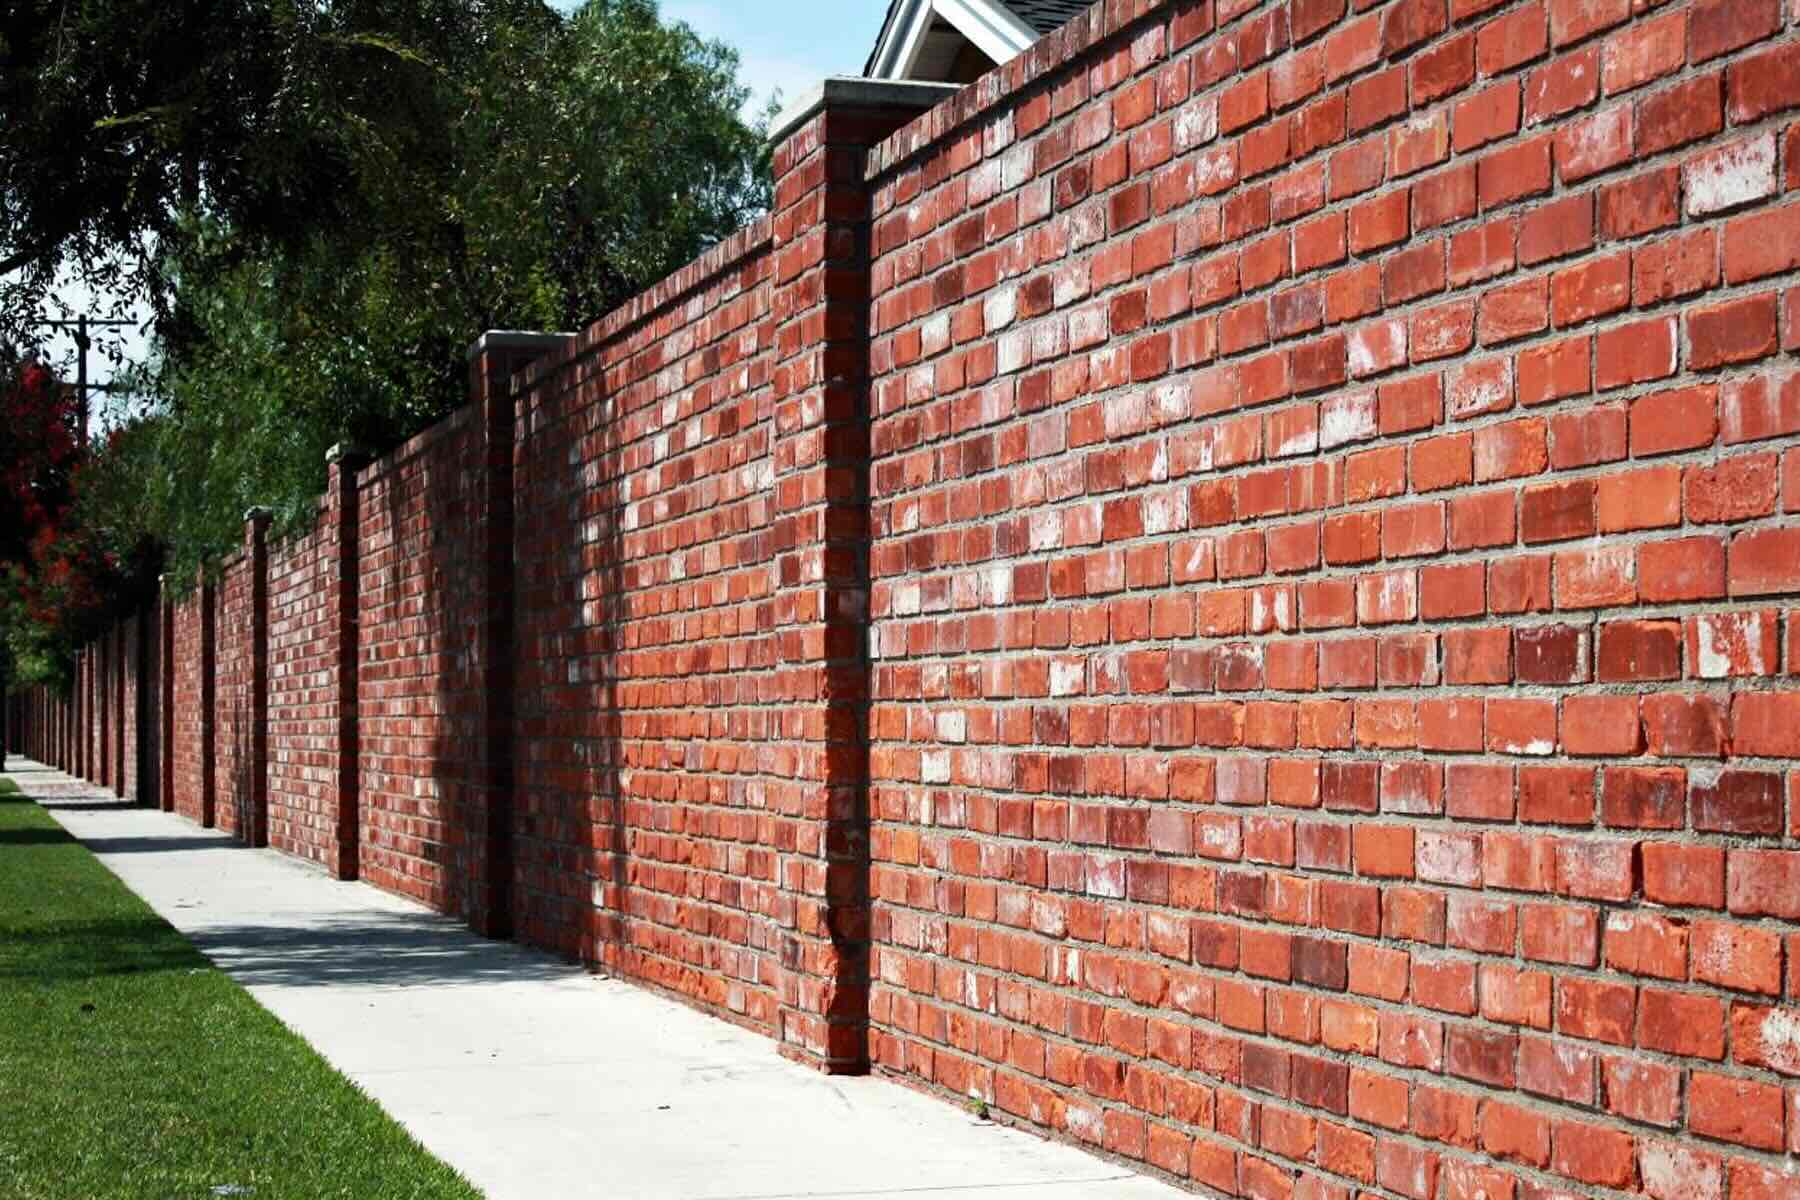 How To Cover A Brick Wall | Storables